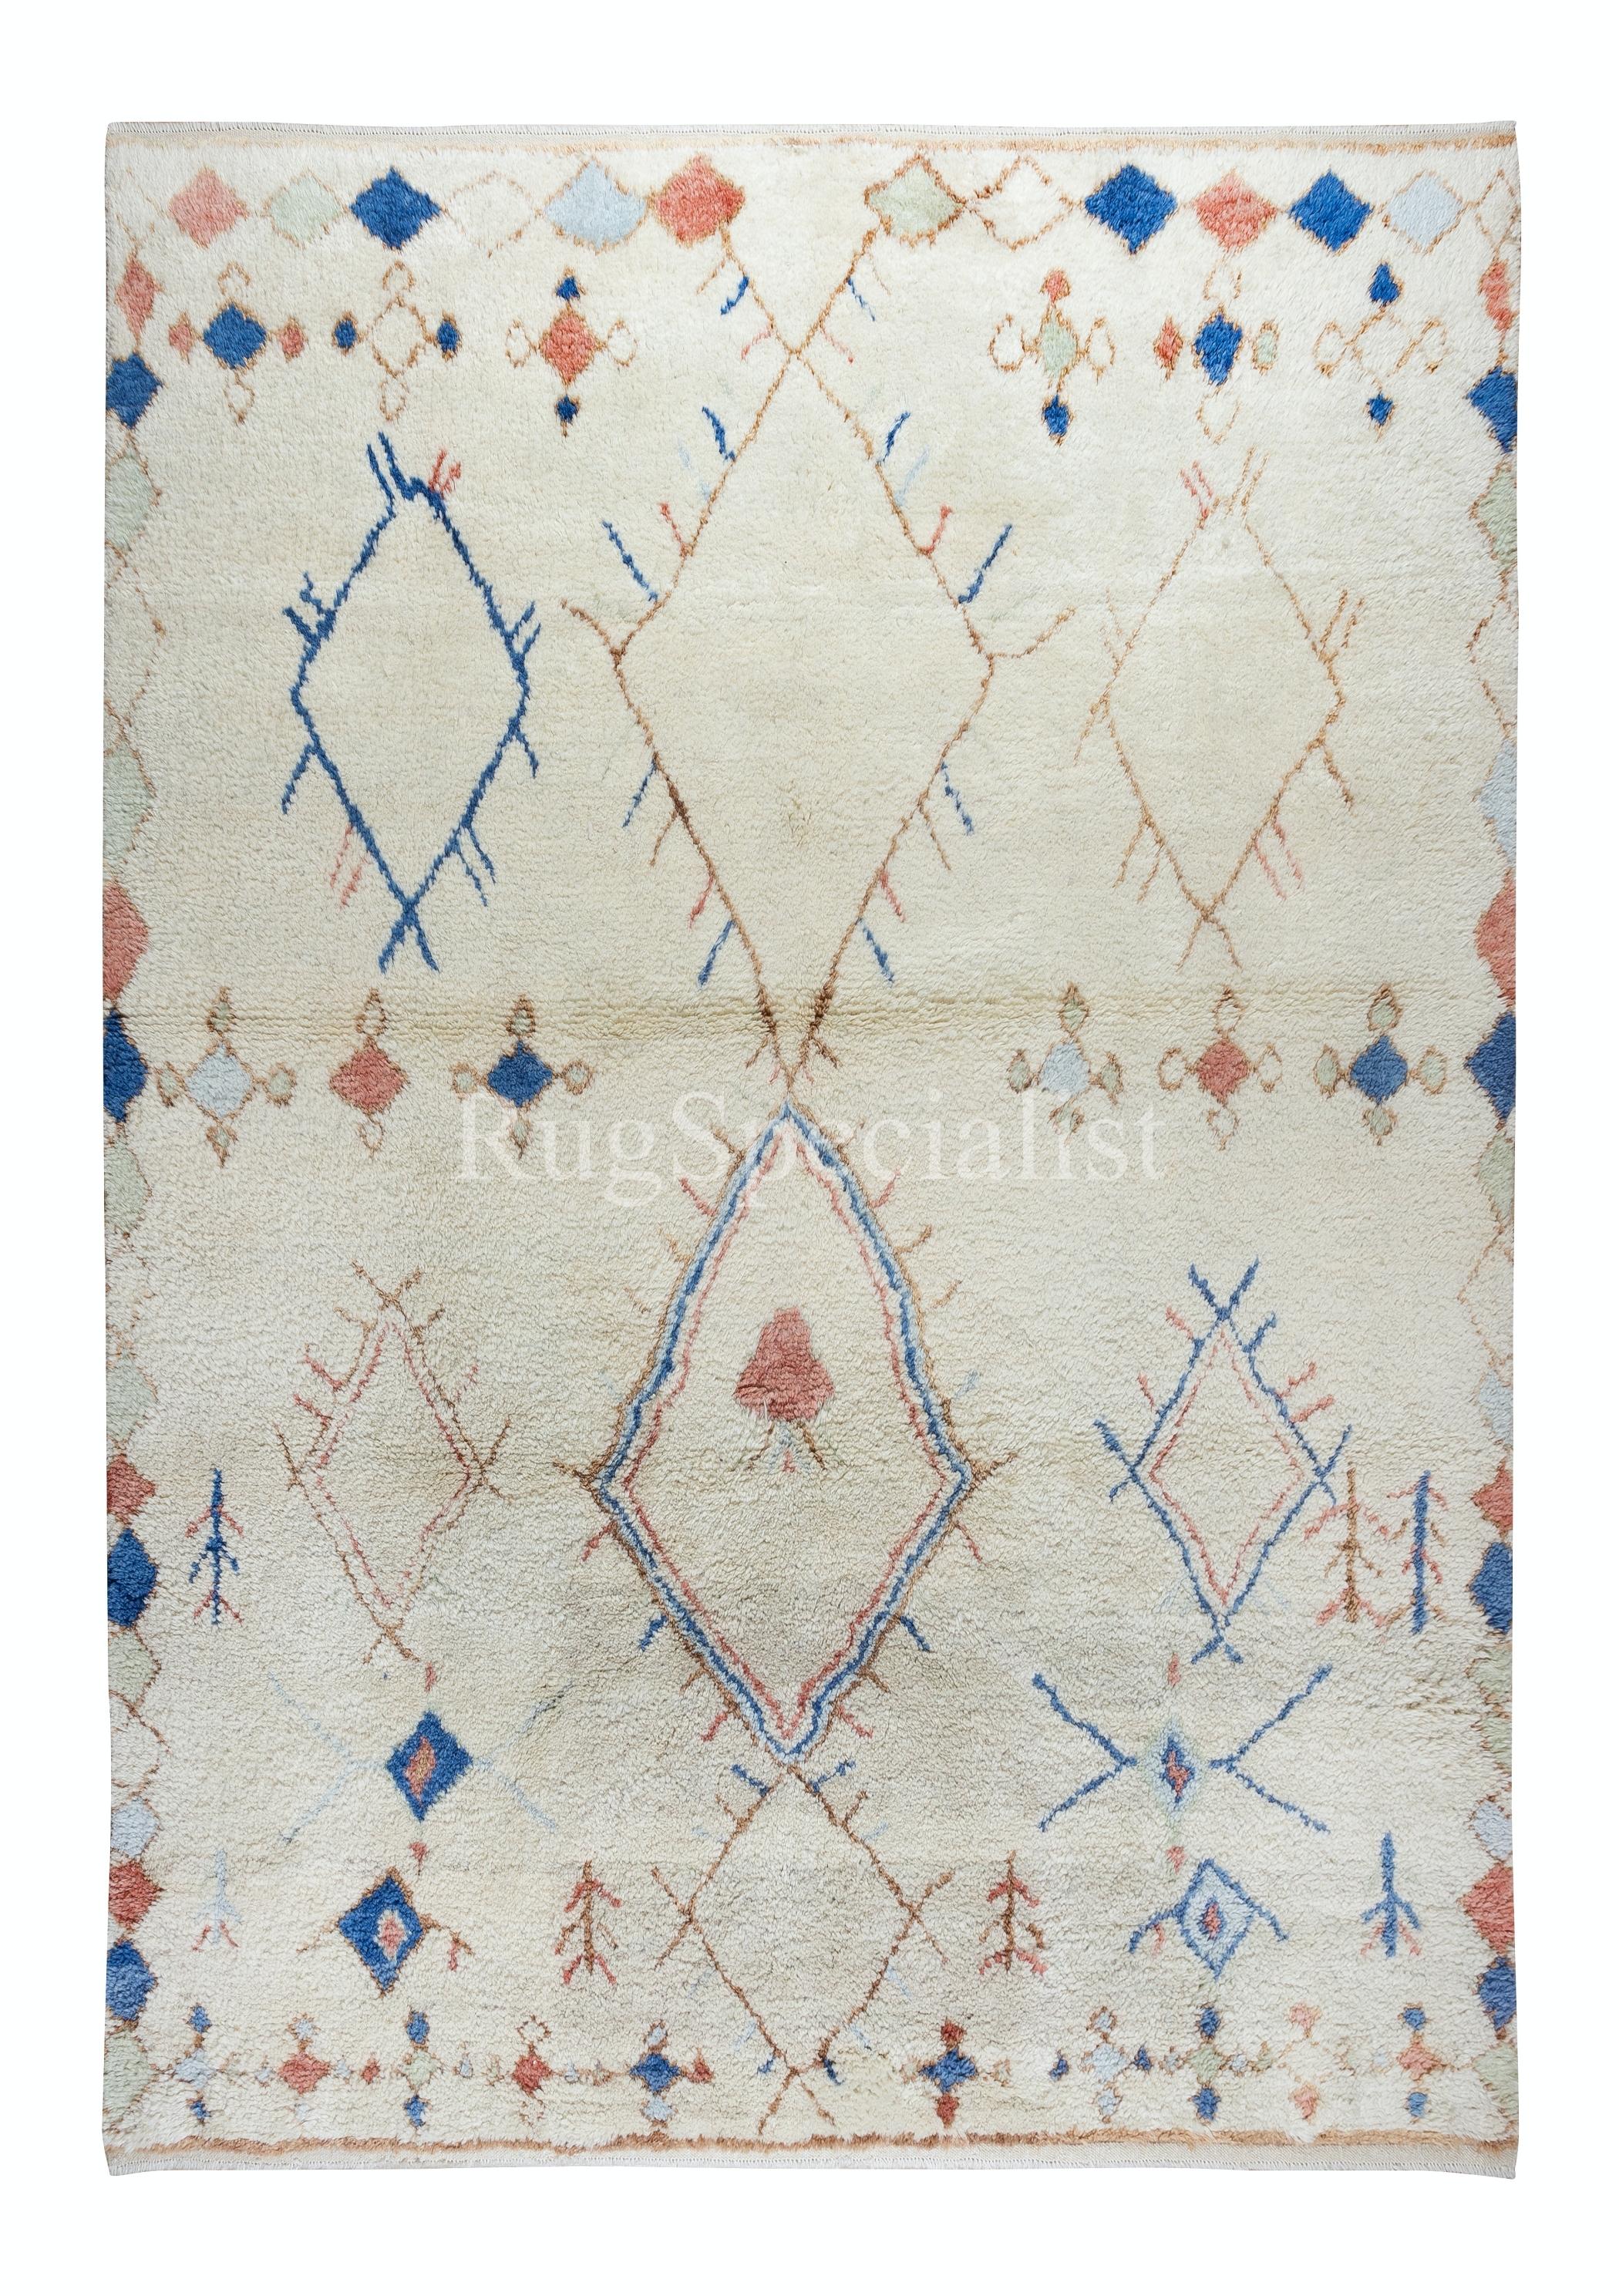 100% natural hand-spun wool of finest quality.

These beautiful hand-knotted rugs are produced from scratch in our atelier located in Central Anatolia, famous for being one of the world's oldest handmade rug making centers.

All our weavers are